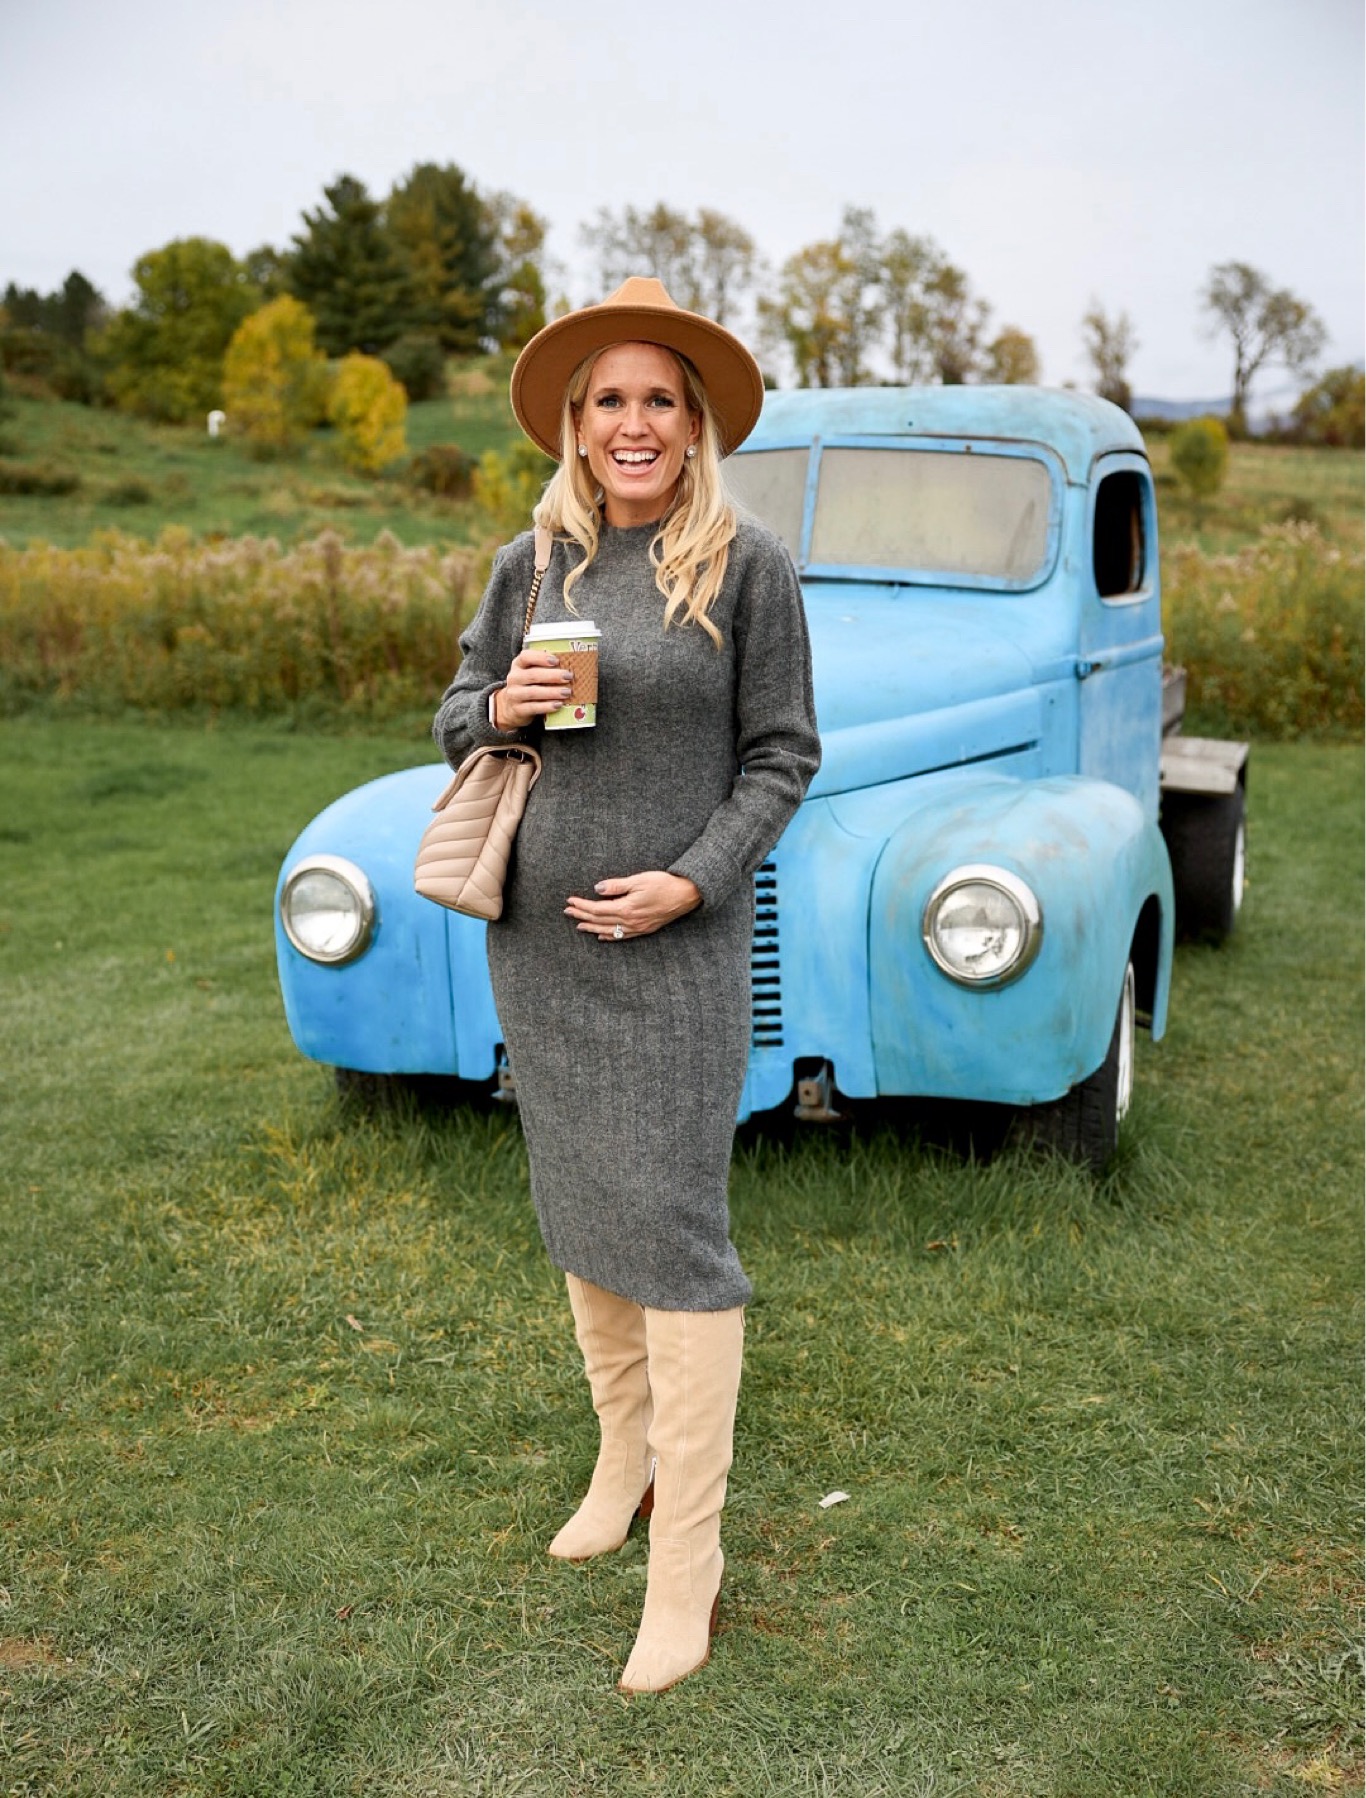 Guide to Stowe, Vermont in the Fall | 11 Things To Do + Tips | Leaf peeper season in Vermont |
 Fall outfit ideas | Maternity outfits in the fall | apple cider donuts in Stowe, Vermont